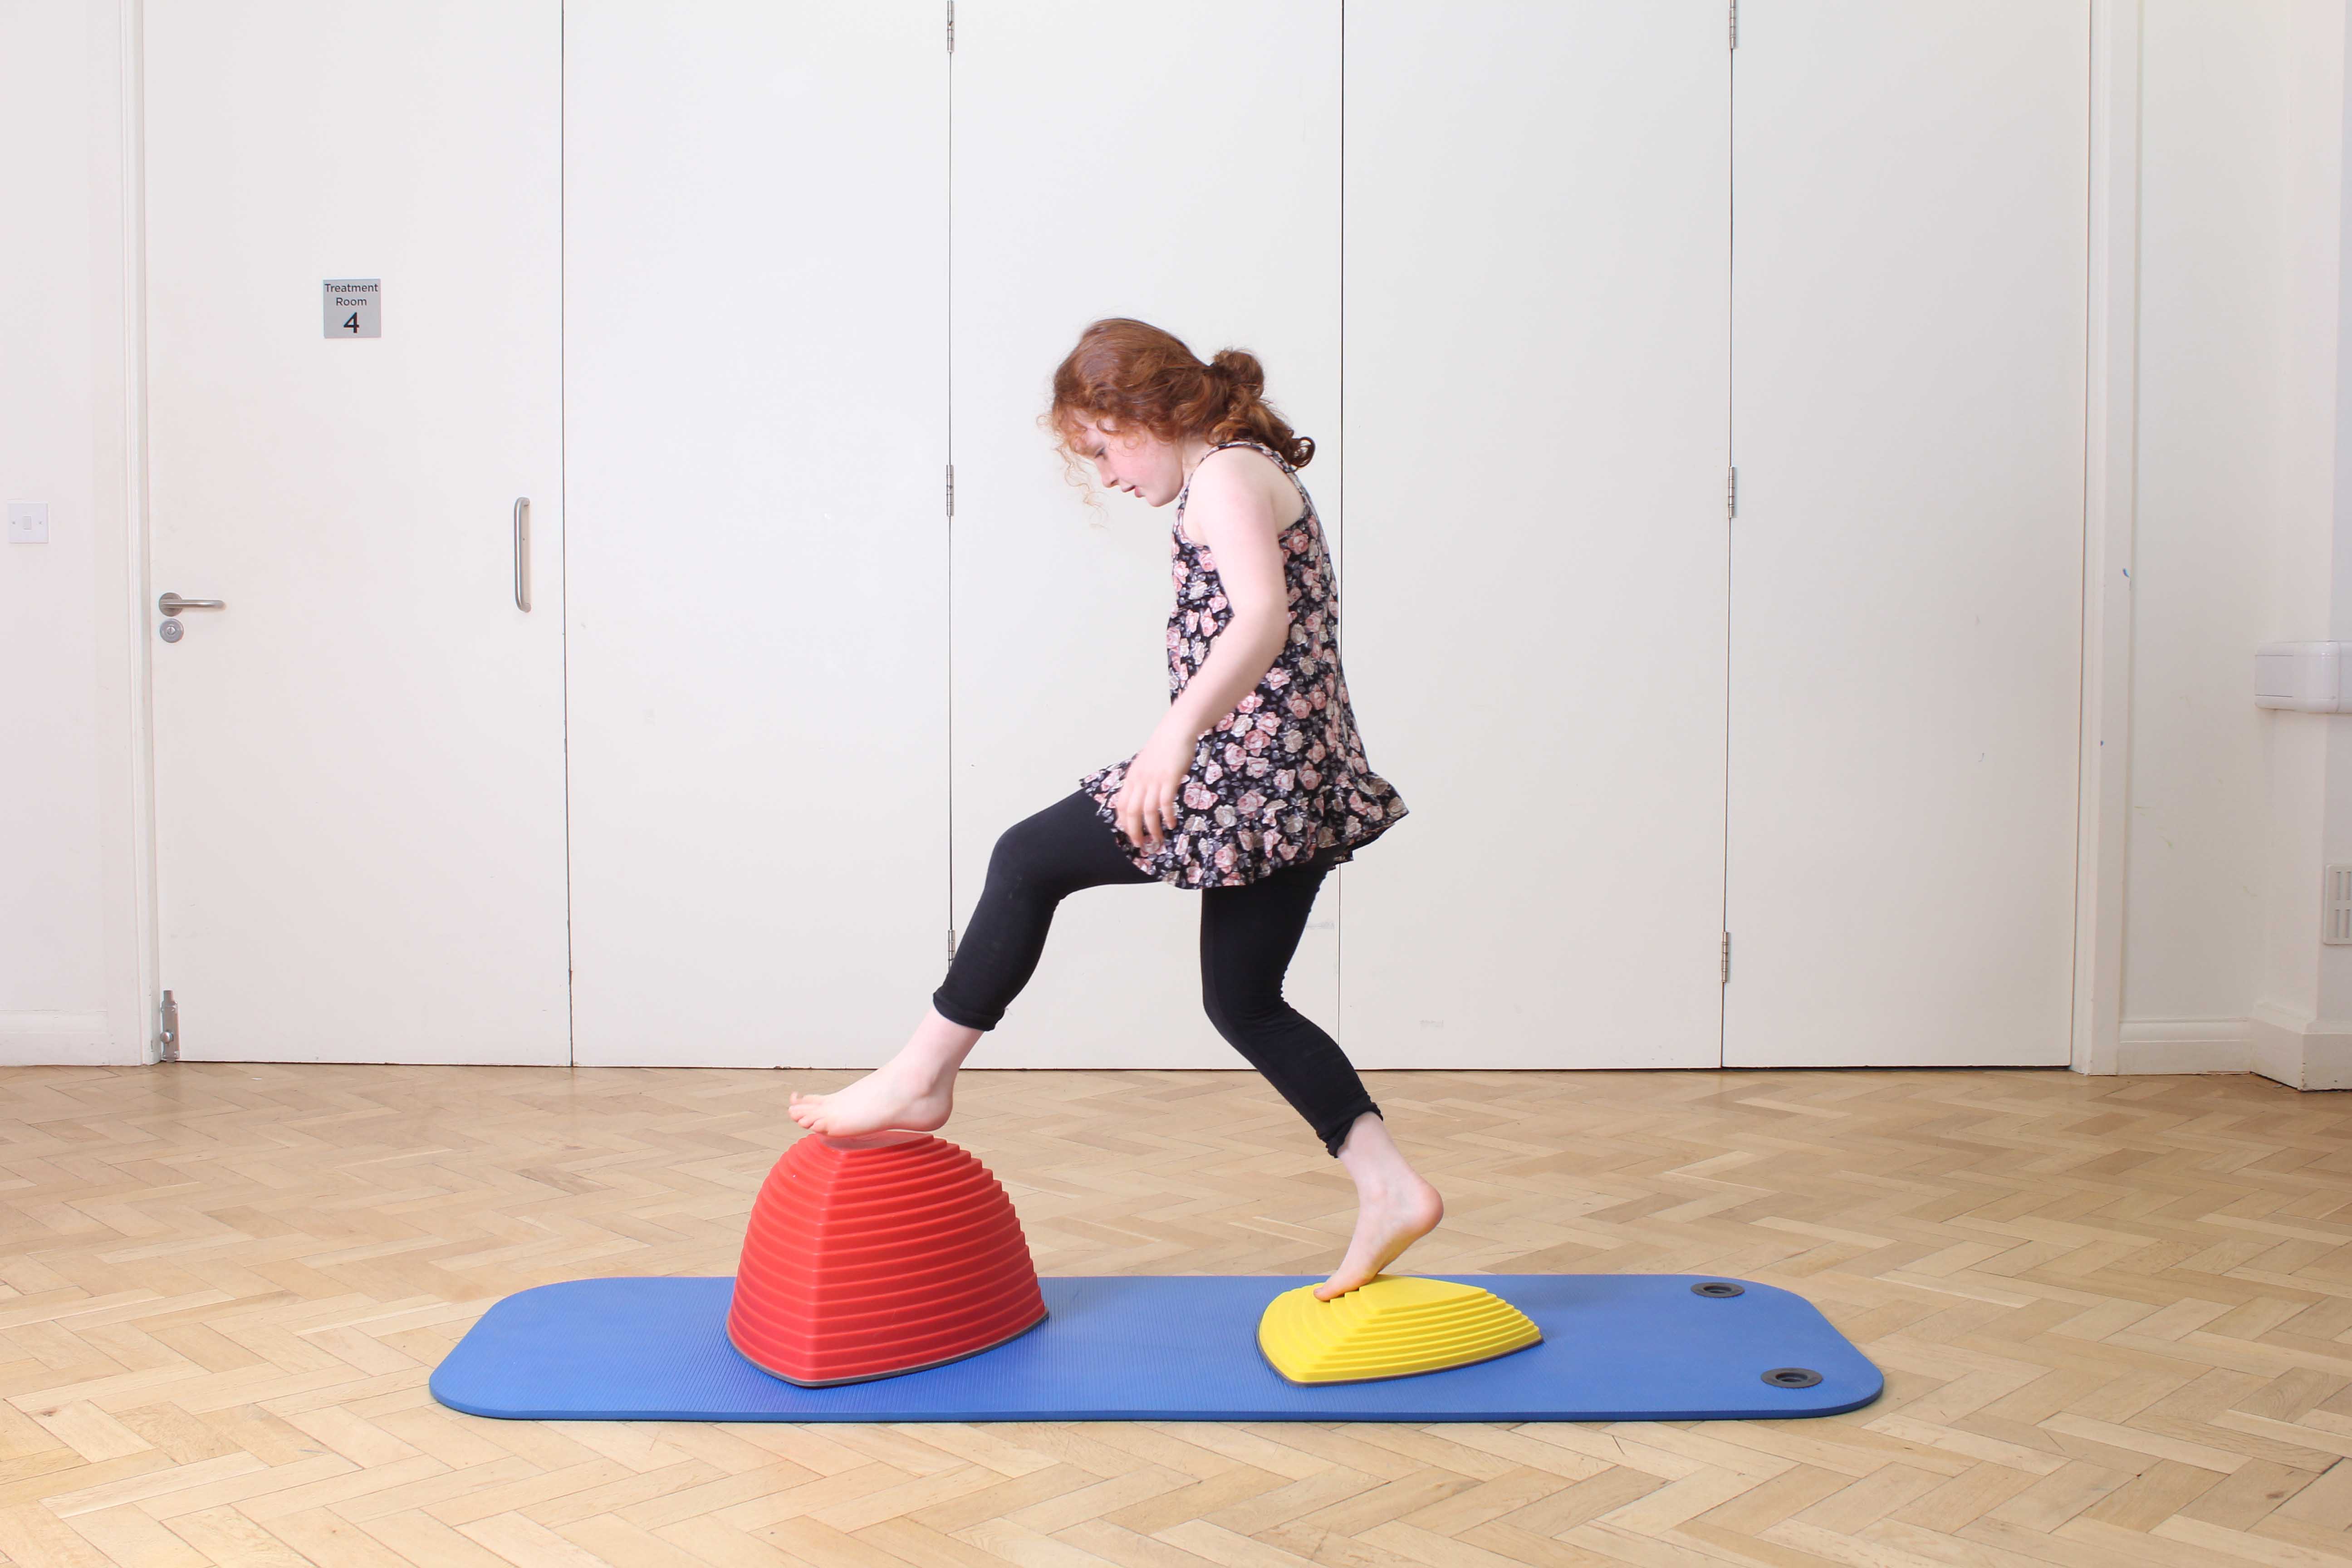 passive stretches and mobilisations of the hip, knee and ankle by an experienced paediatric physiotherapist